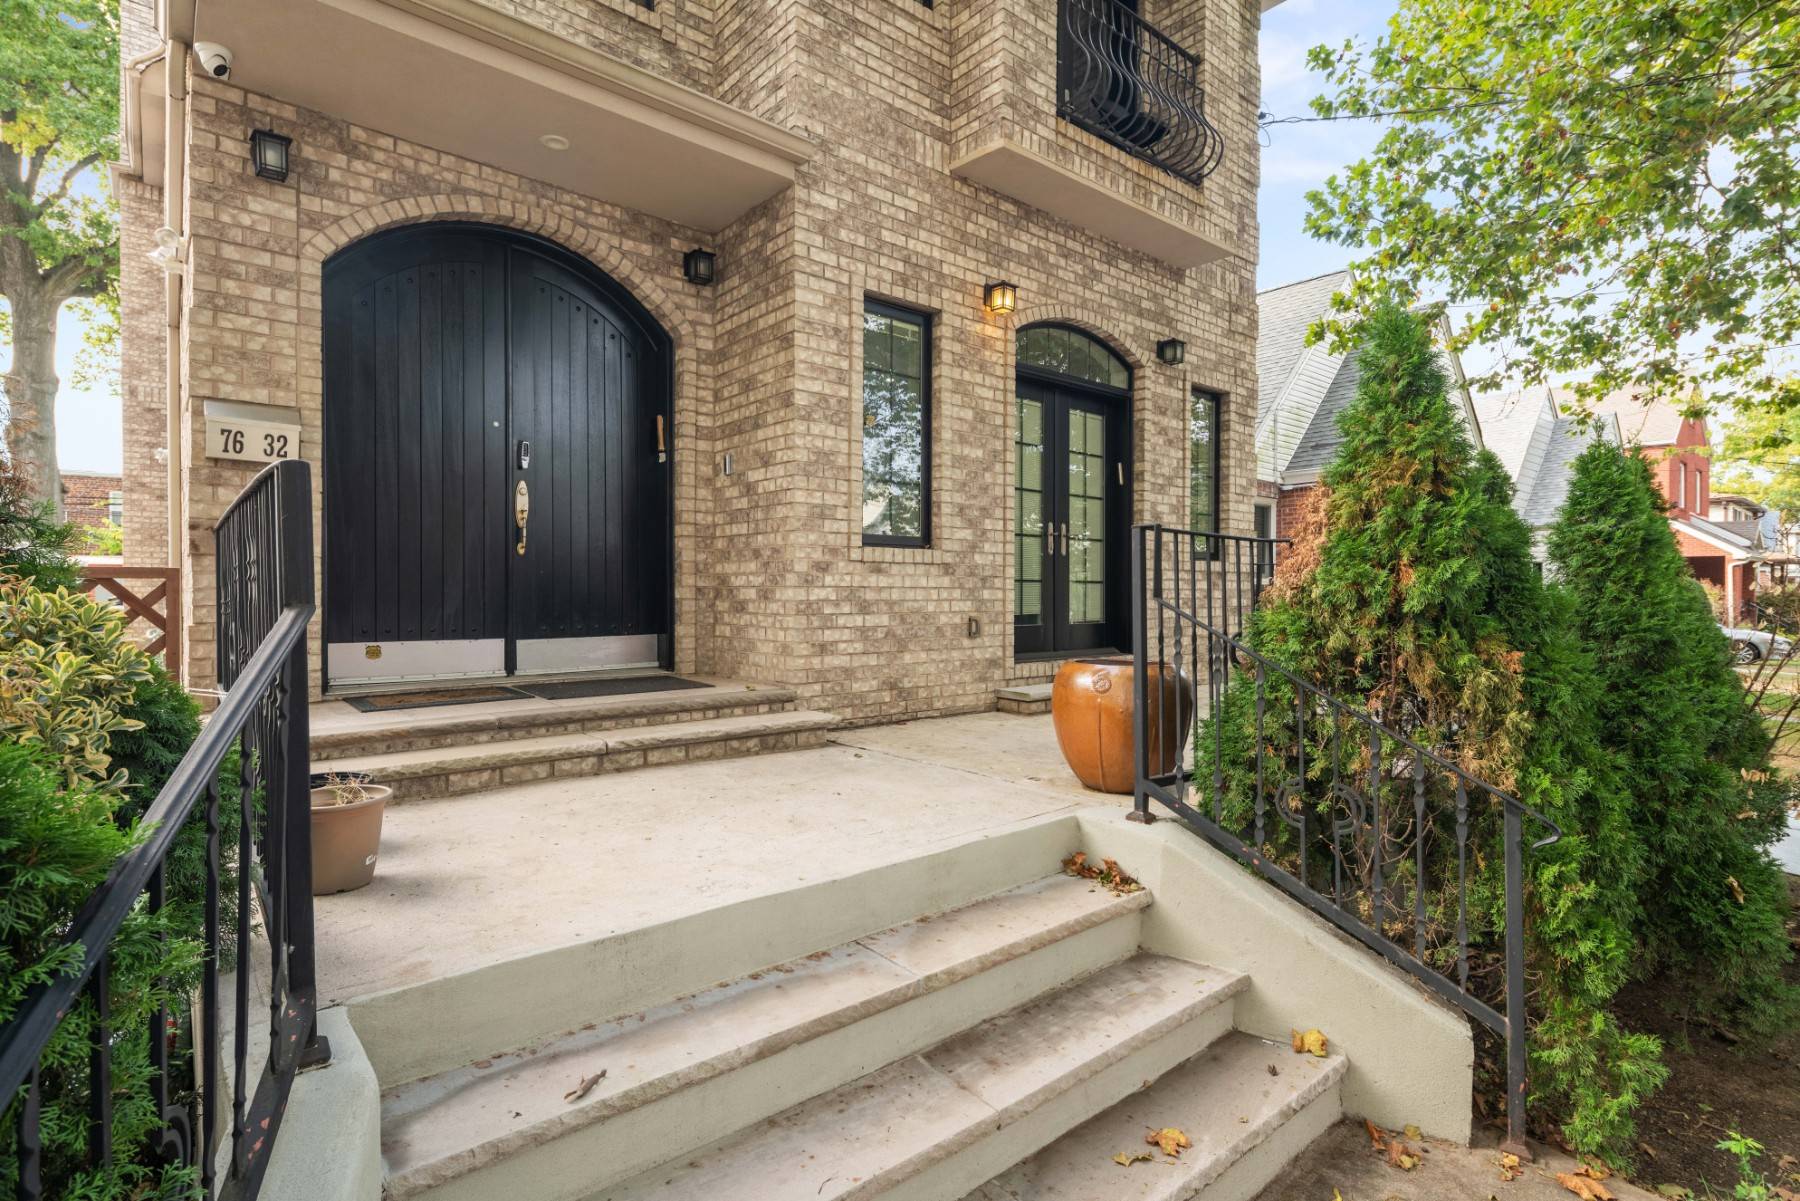 Check out this gorgeous Queens rarity a magnificent brick, 4 bedroom, 3 full and 2 half bathroom Colonial, built in 2010, offering 3, 680 square feet of luxury living.